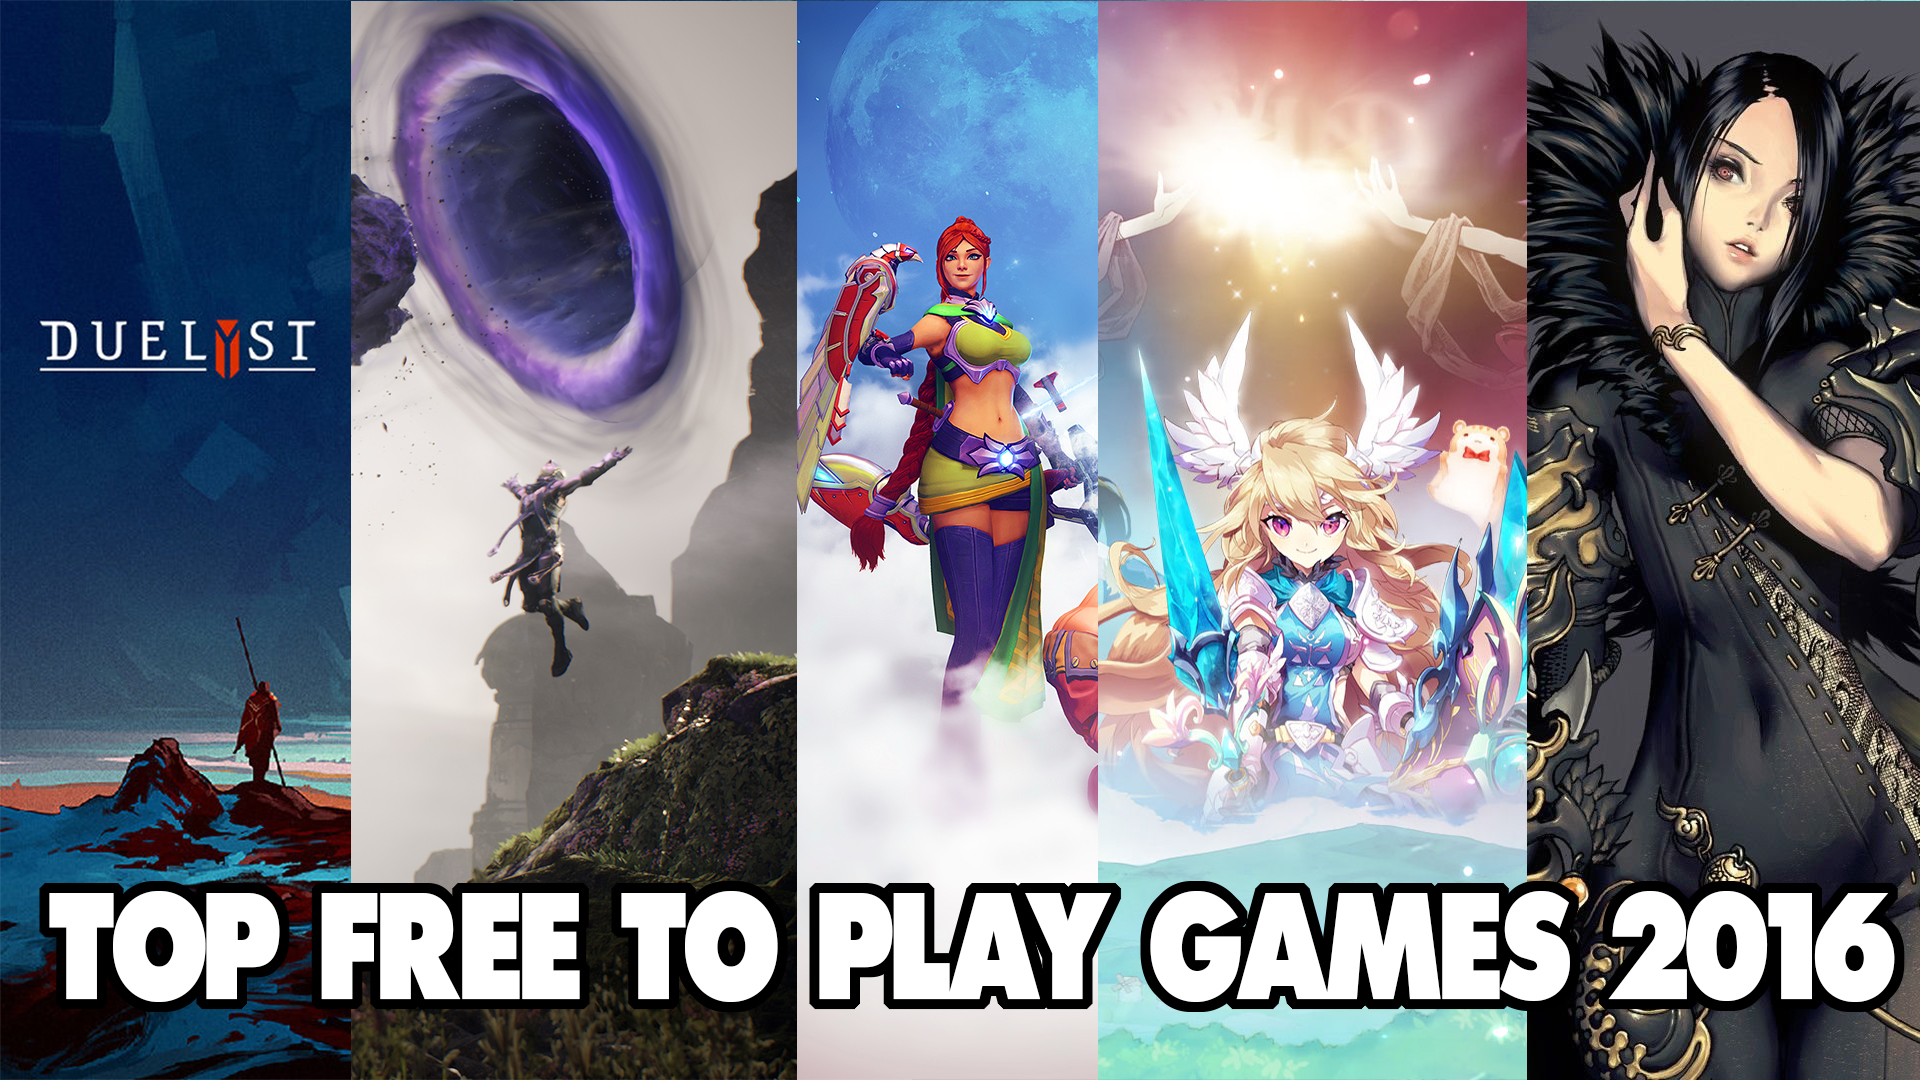 MMOHuts.com Top 13 Free to Play Games 2016!